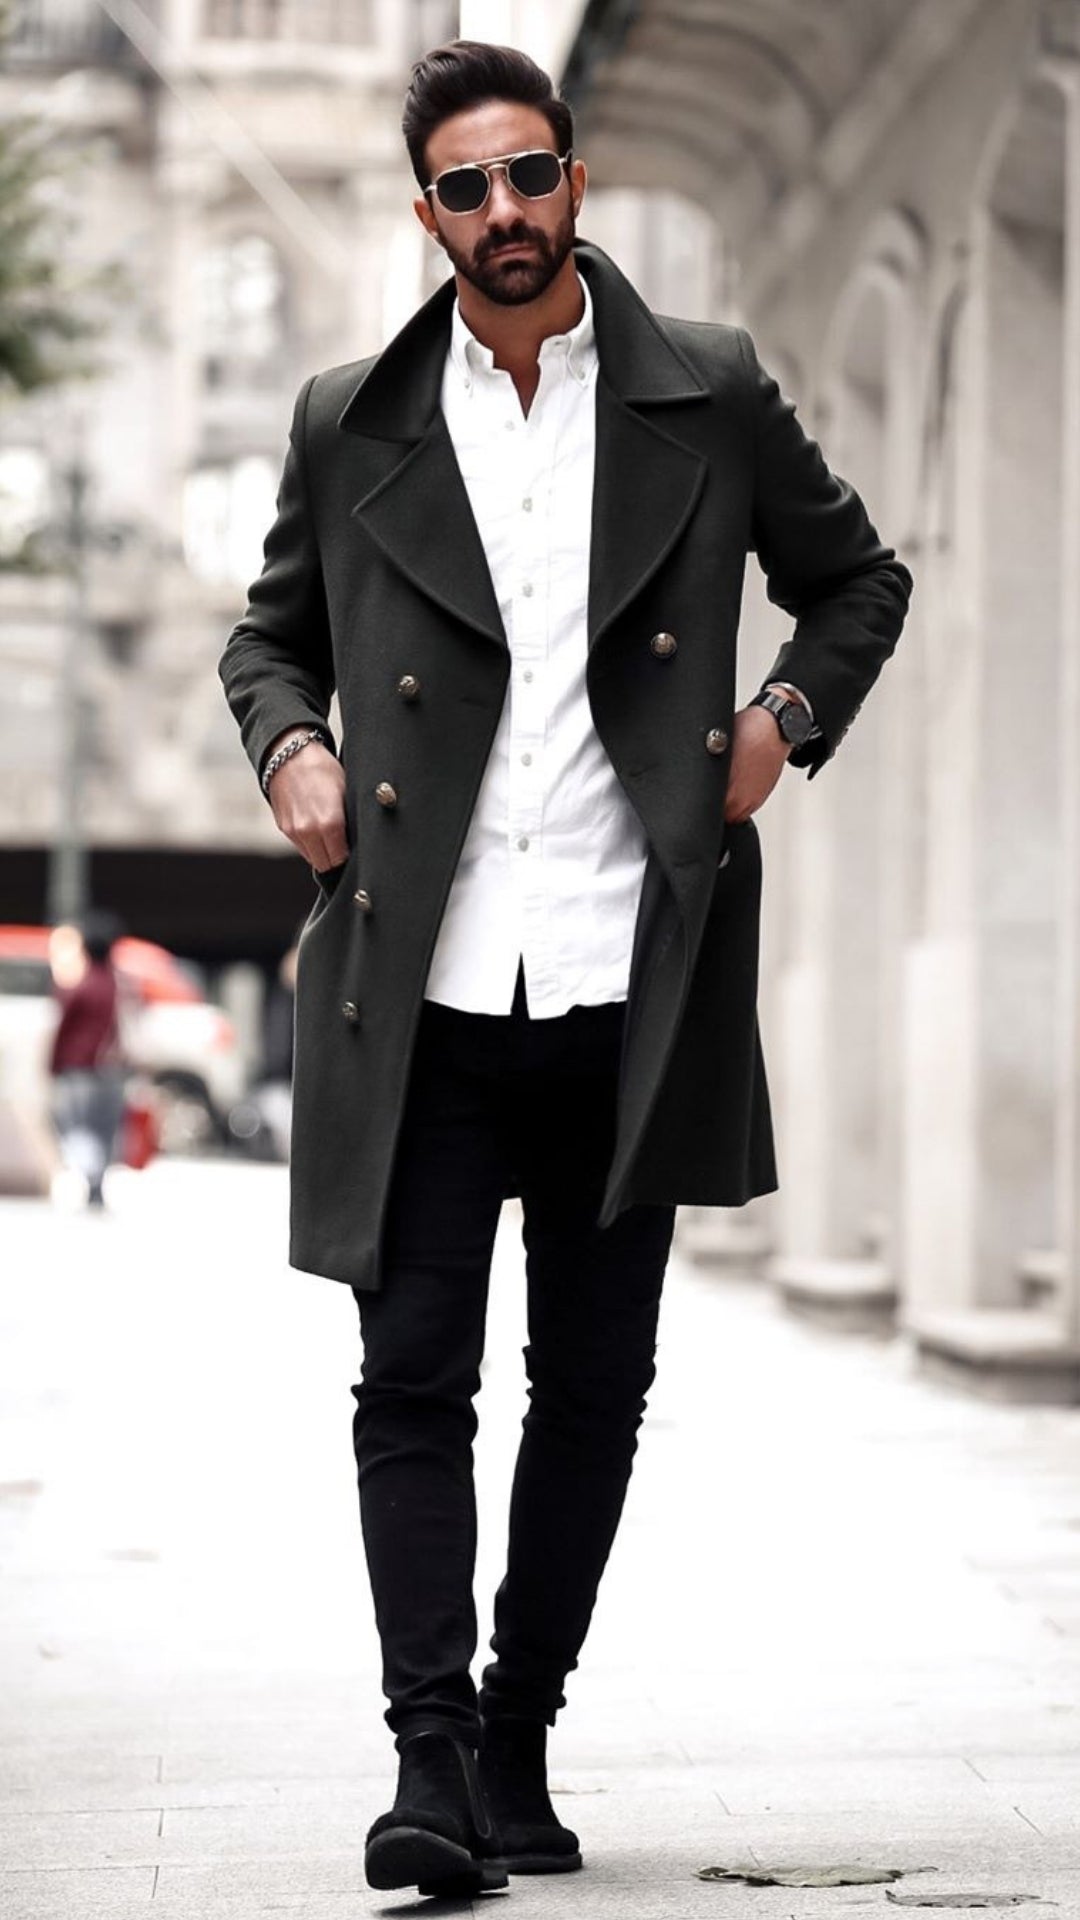 5 Coolest Long Coat Outfits For Men #longcoat #outfits #mensfashion # ...